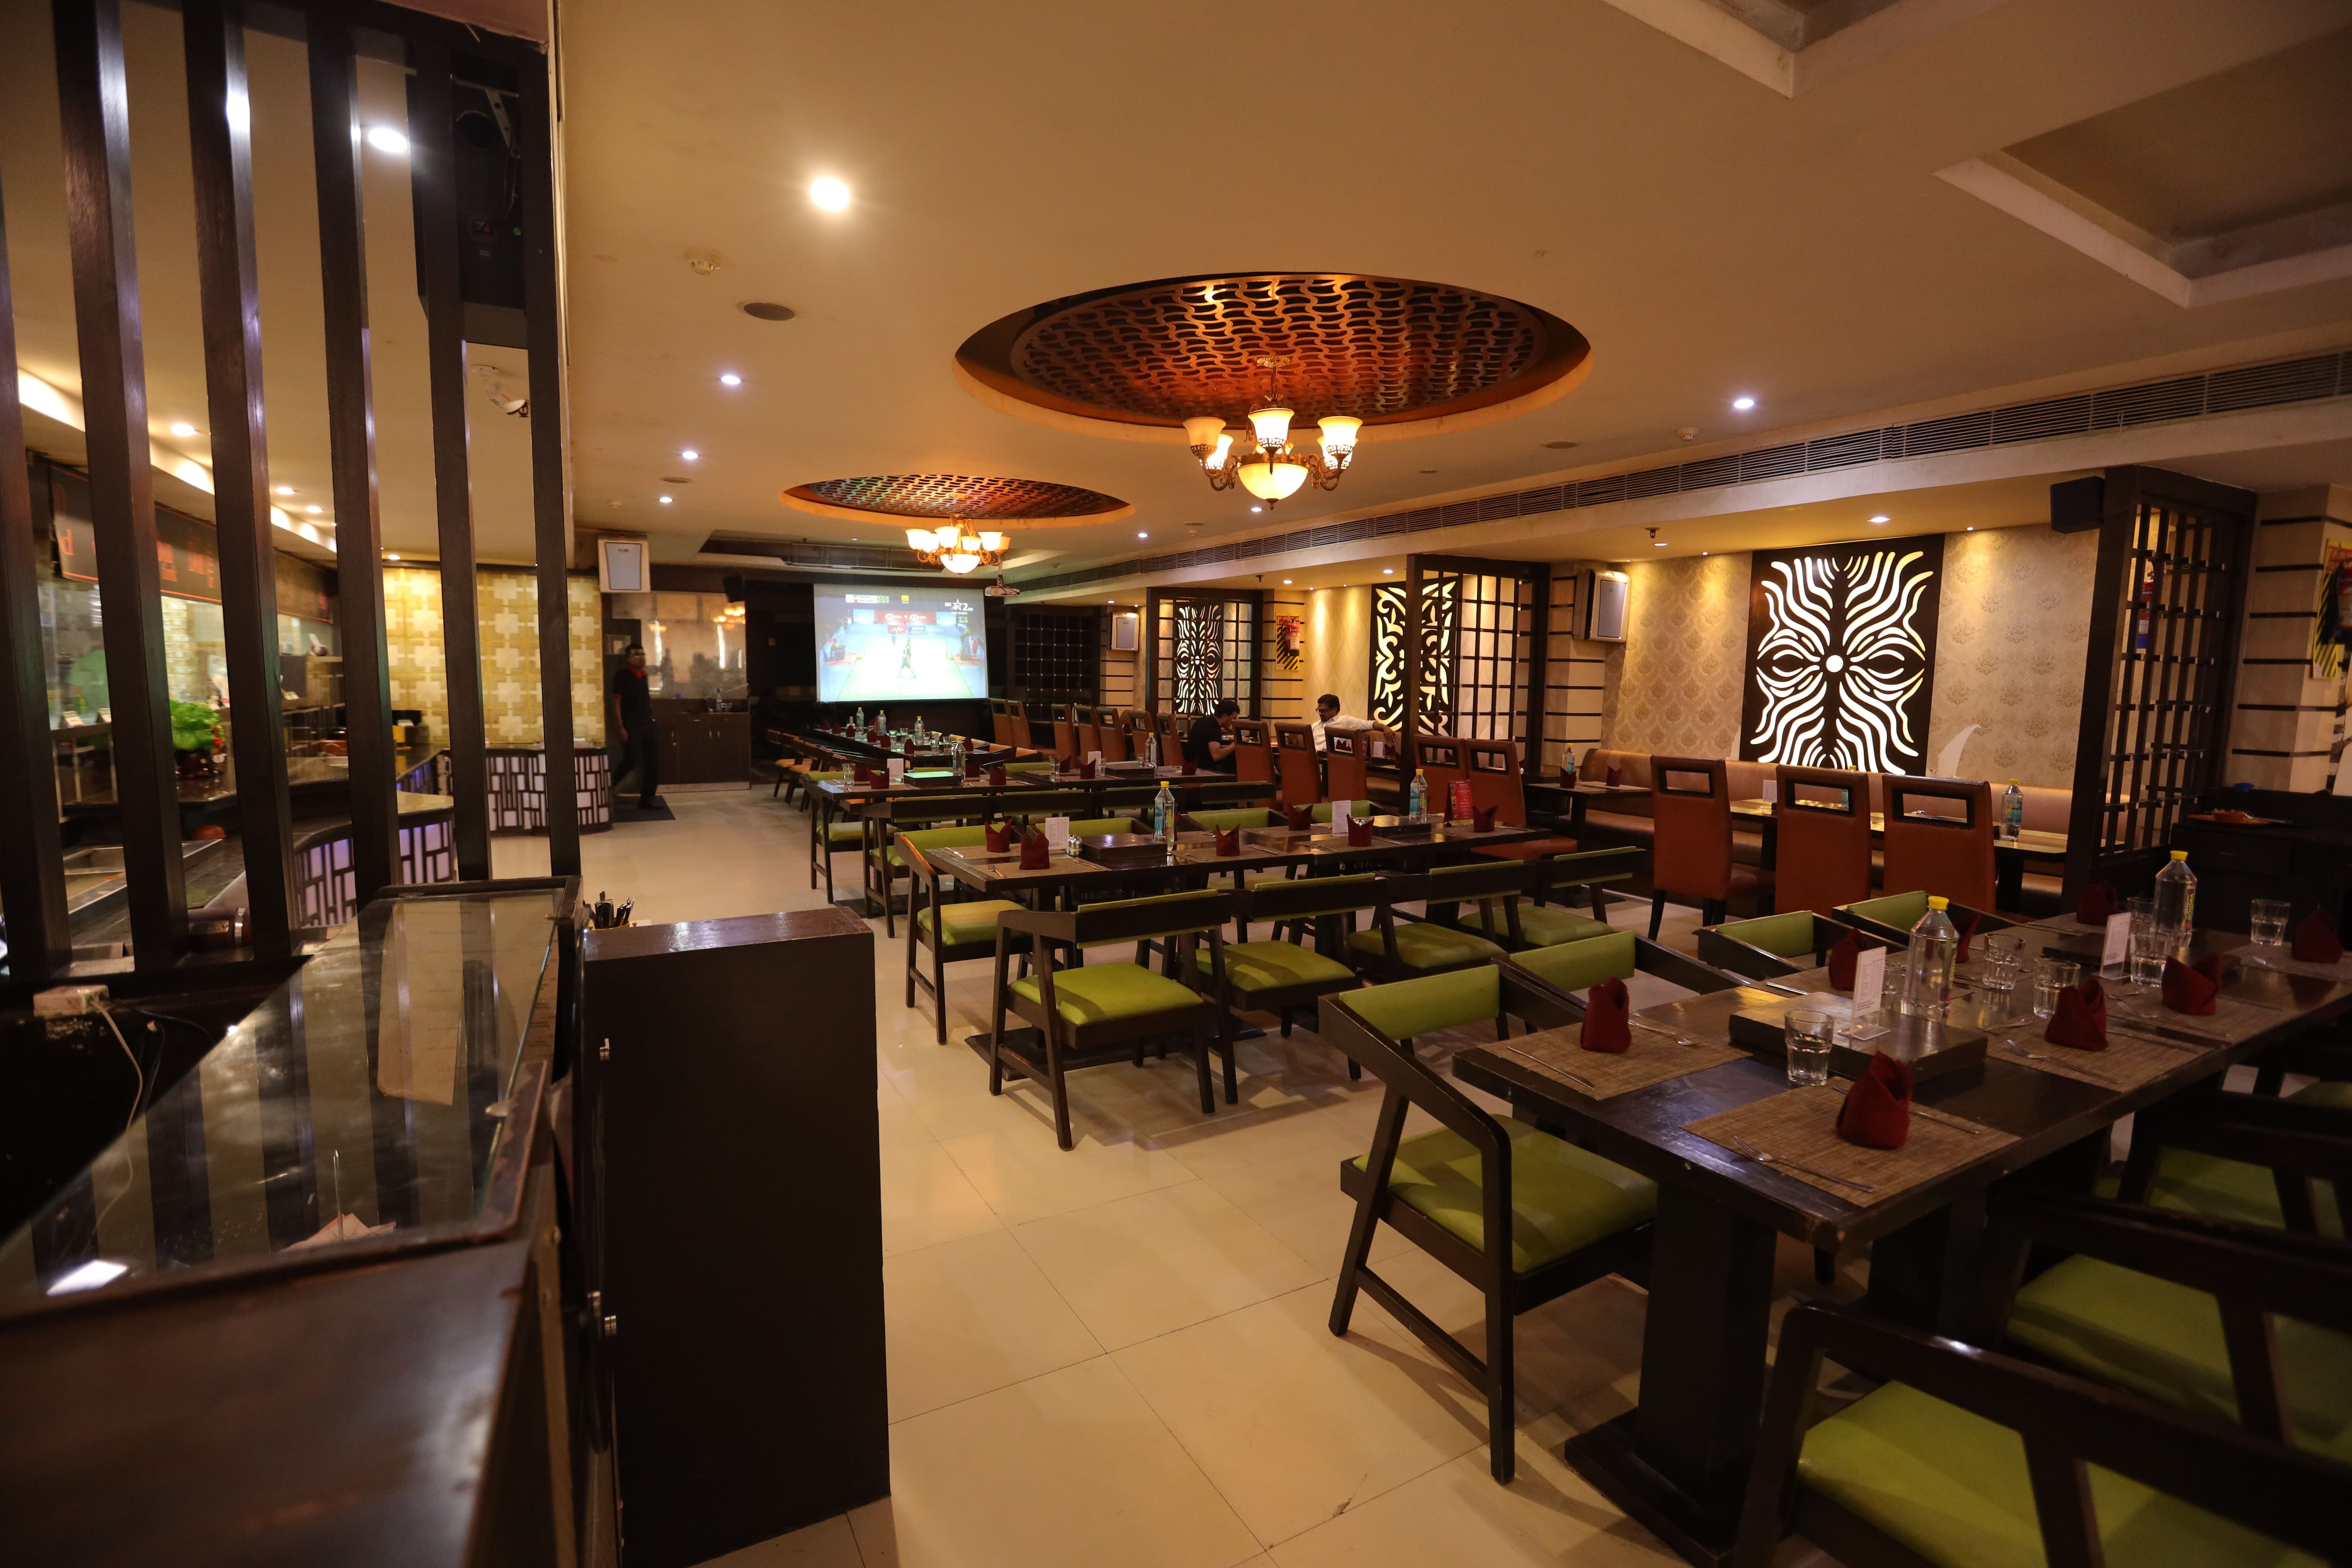 spize kitchen and bar sector 63 noida